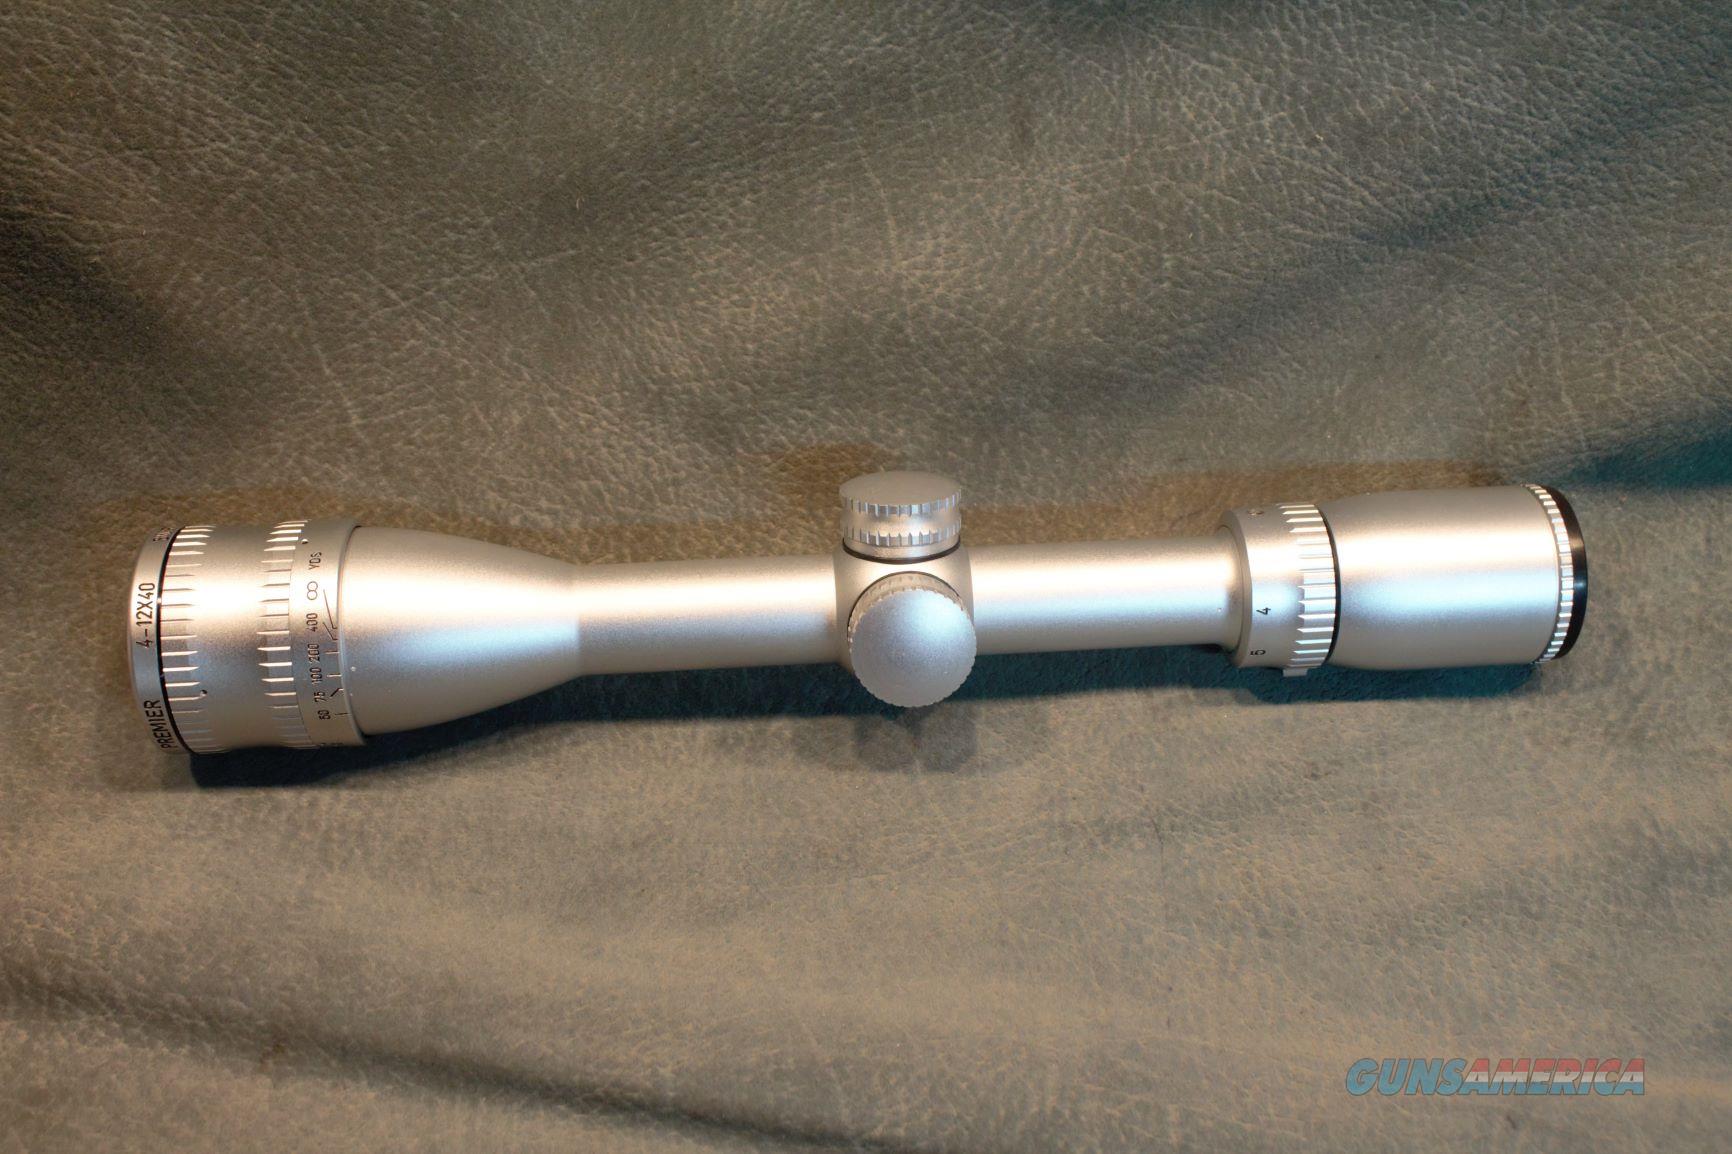 Swift 4 12x40mm Silver Riflescope For Sale At 956692624 2285